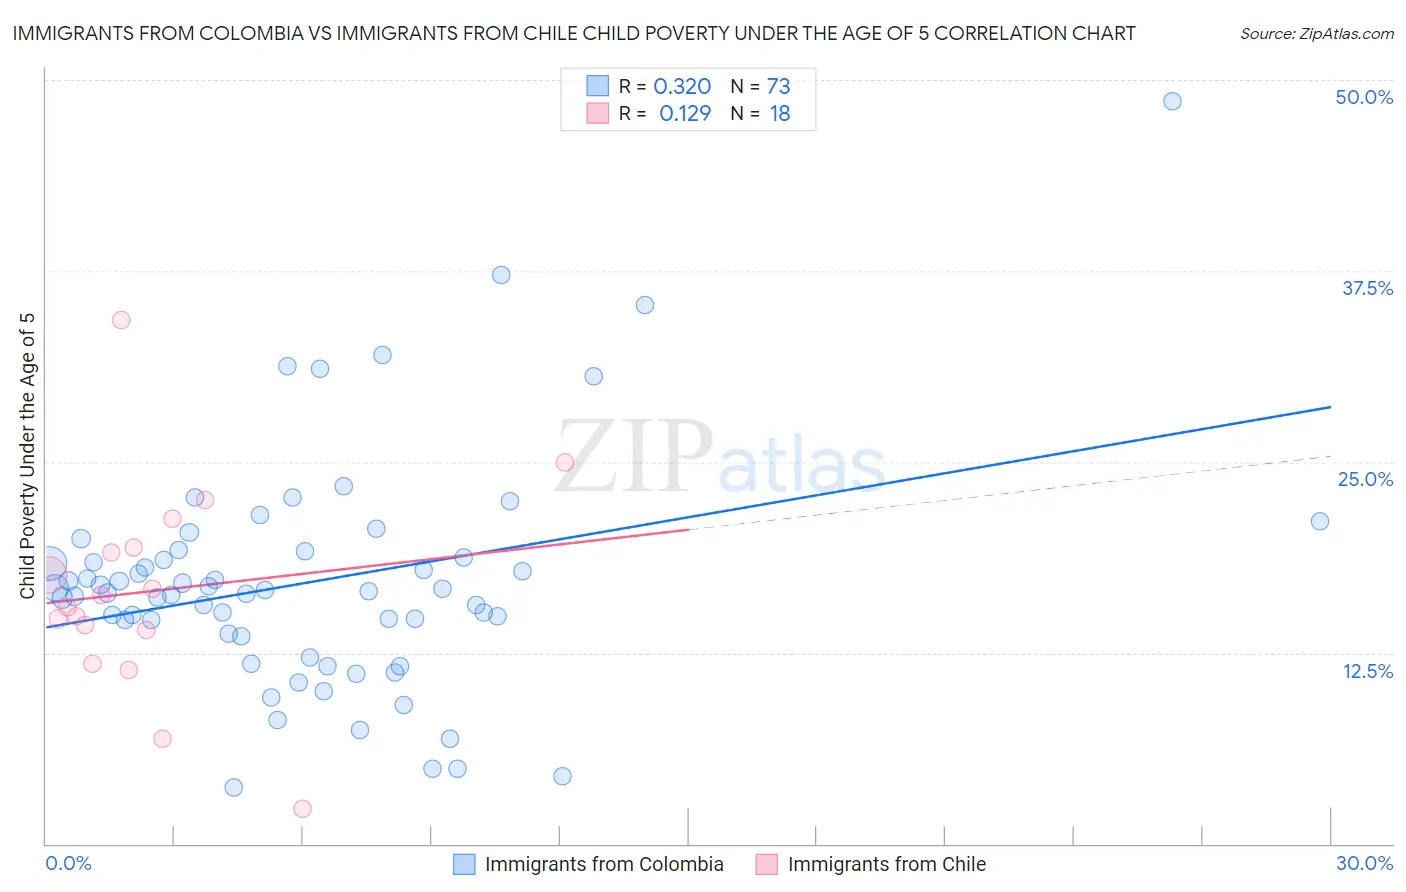 Immigrants from Colombia vs Immigrants from Chile Child Poverty Under the Age of 5